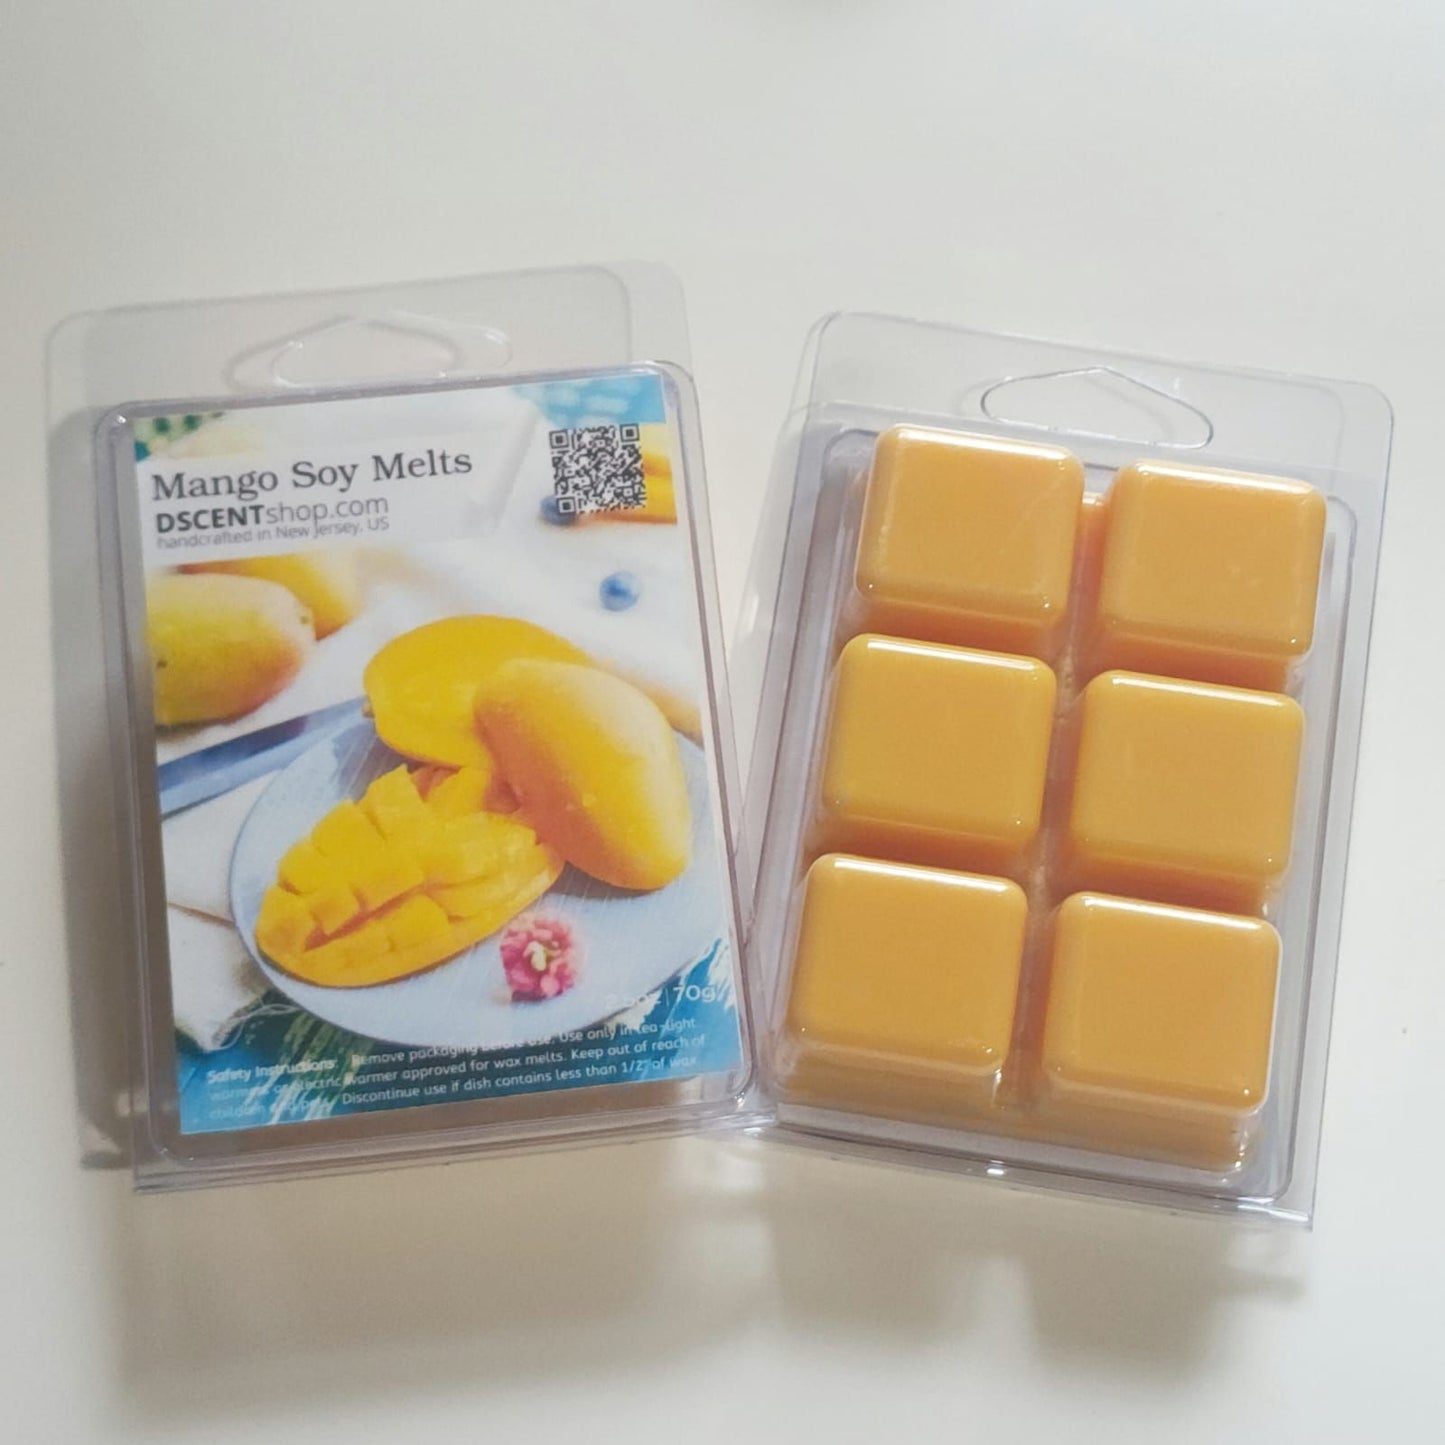 Mango Soy Wax Melts | Clamshell - D SCENT 